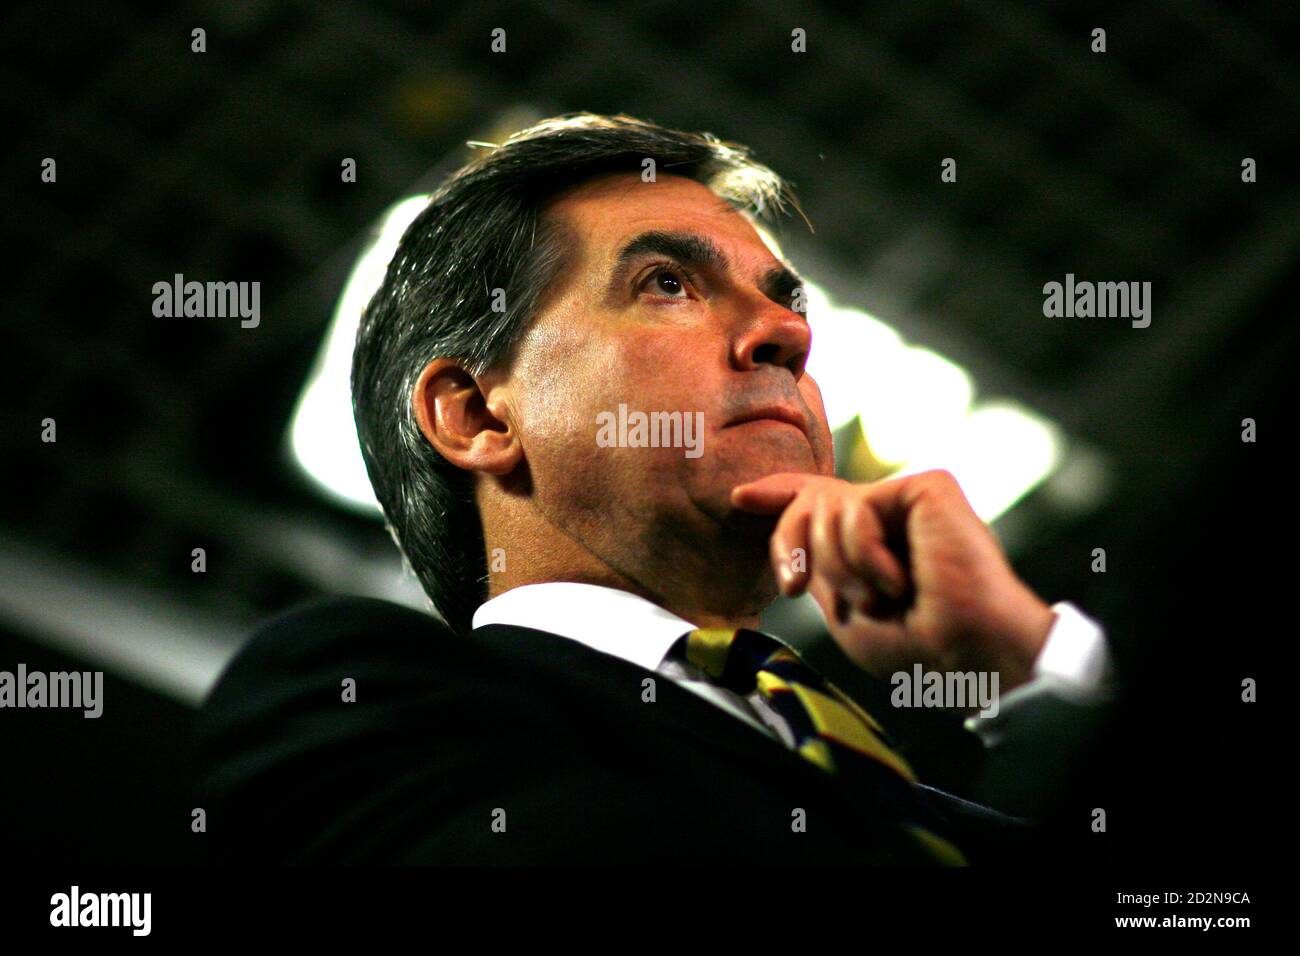 Canada's Industry Minister Jim Prentice pauses during a news conference on Parliament Hill in Ottawa May 27, 2008. Canada's government will launch a wireless spectrum auction that it hopes will bolster competition and lower consumer prices by allowing new players to break into the cellular phone market.       REUTERS/Chris Wattie       (CANADA) Stock Photo